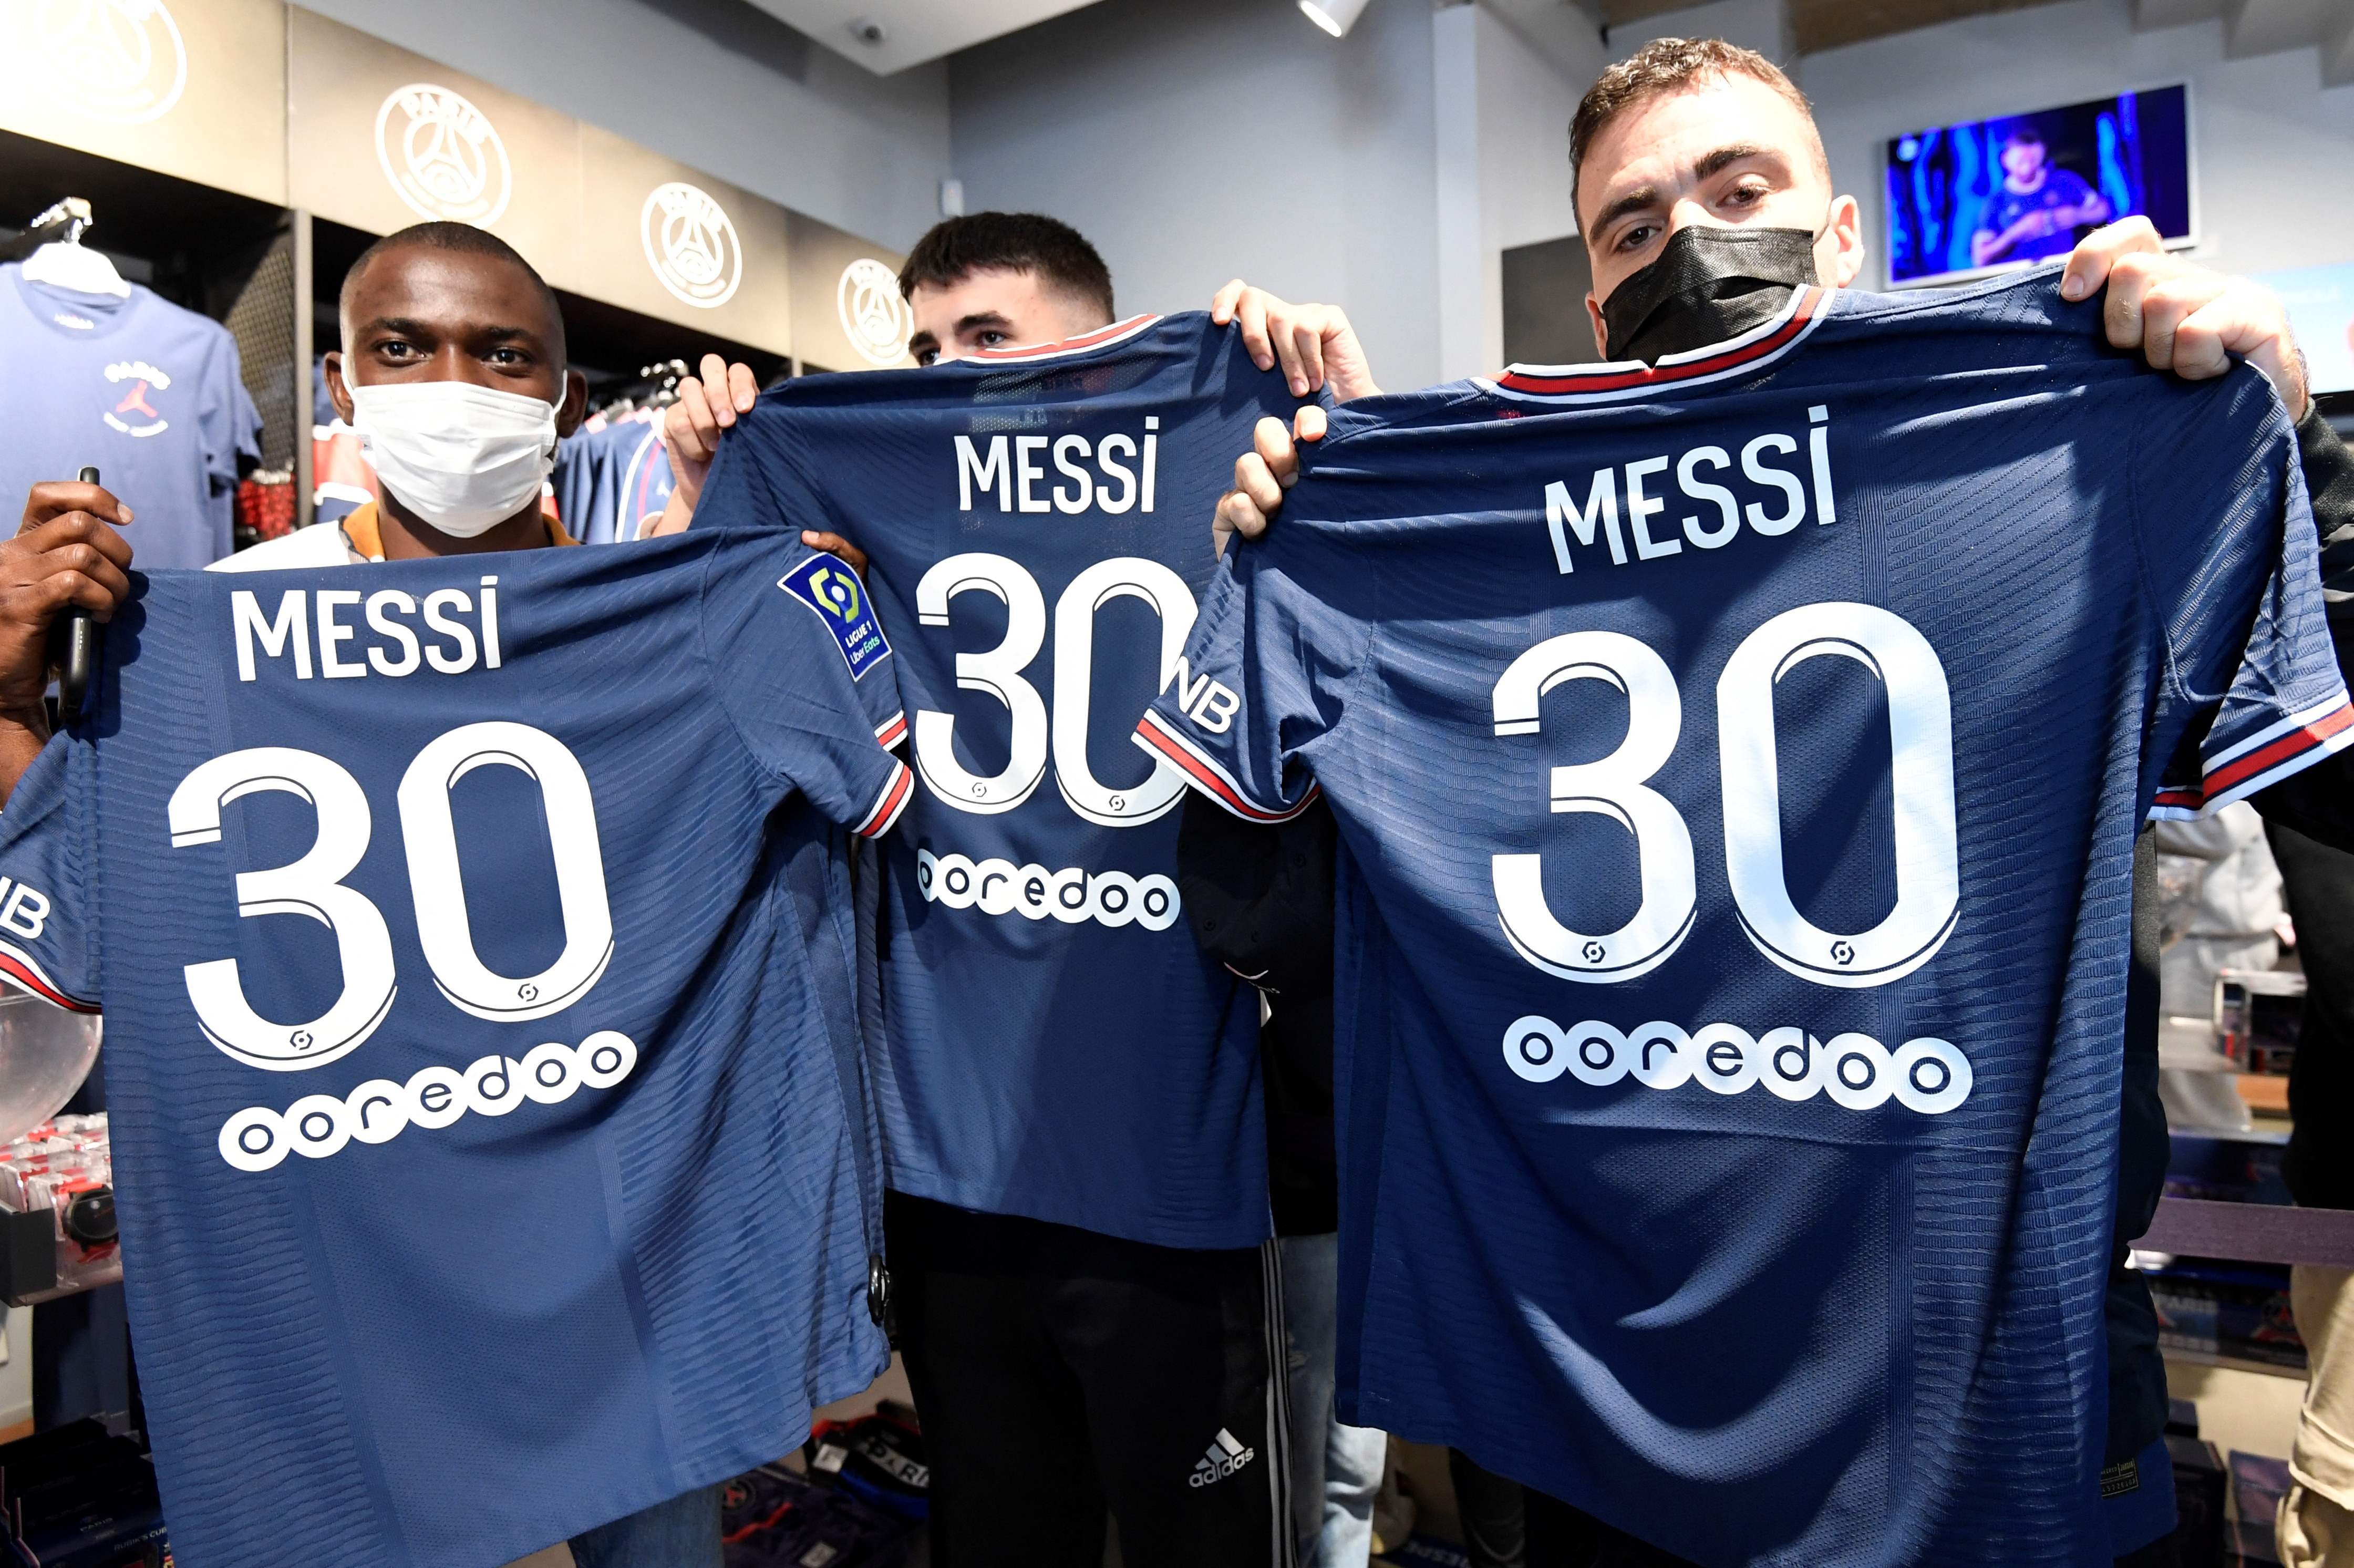 Somes lucky fans were able to get their hands on a 'Messi 30' jersey on Wednesday morning